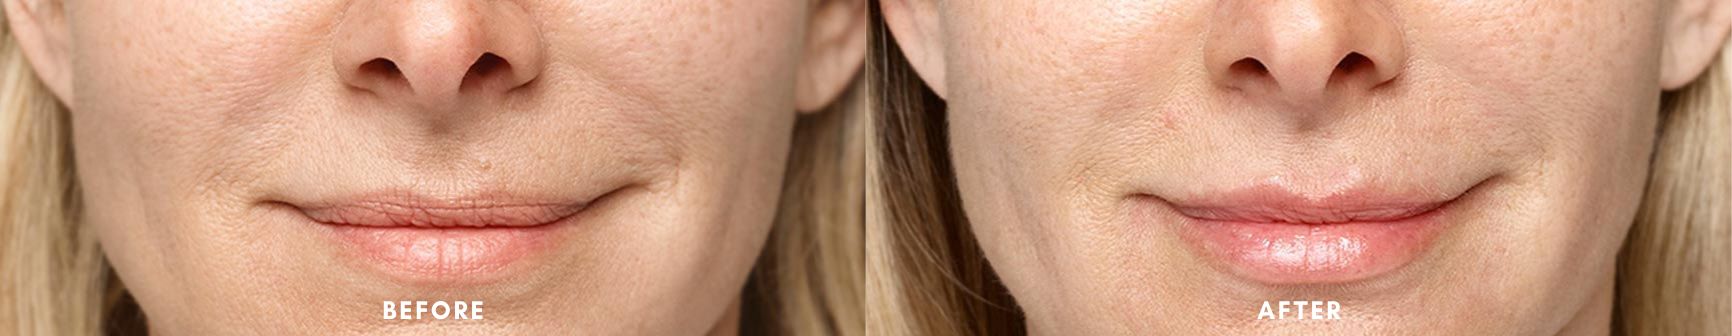 Amazing before and after result from restylane lip filler treatment at Hollywood Body Laser Center